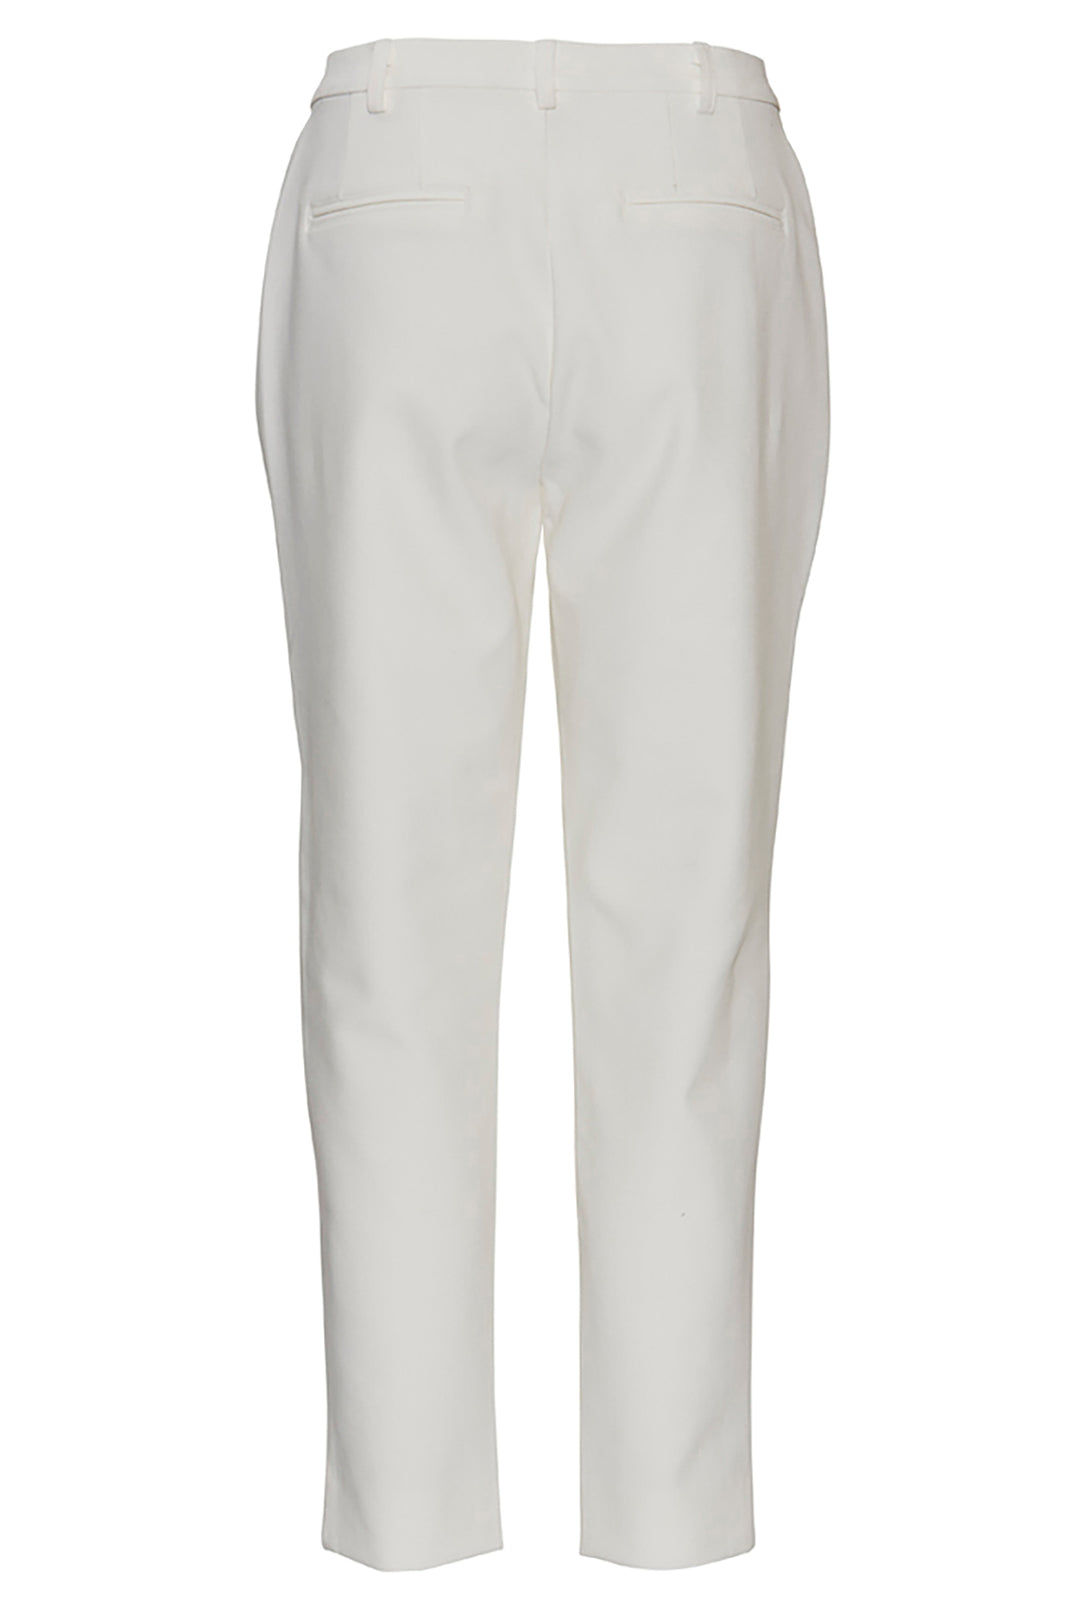 Heartmade Naya HM TROUSERS 104 Off White